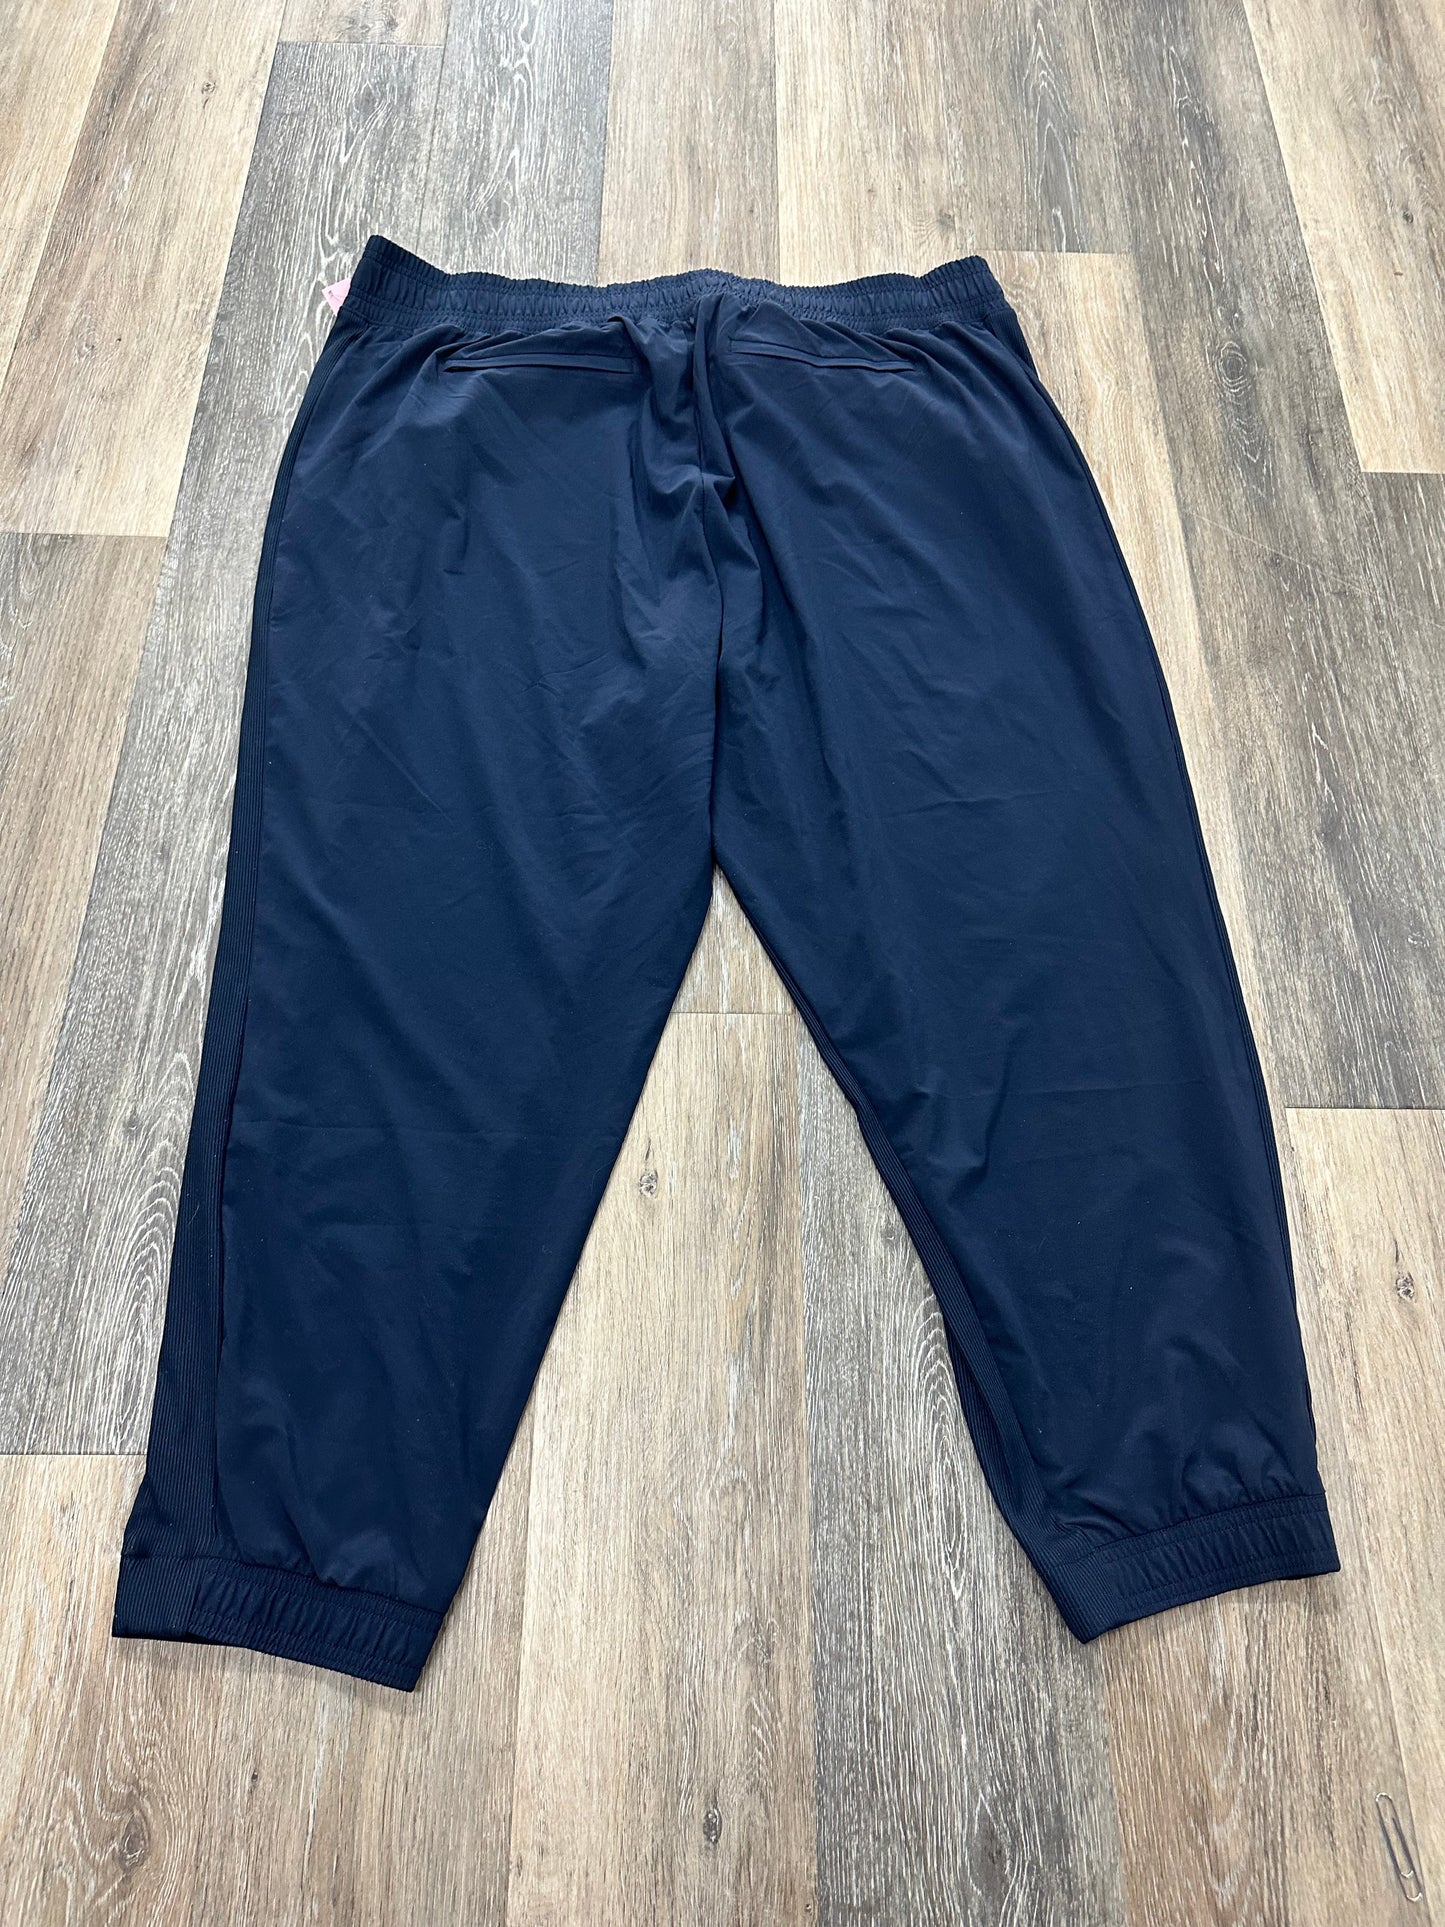 Athletic Pants By Athleta  Size: 22